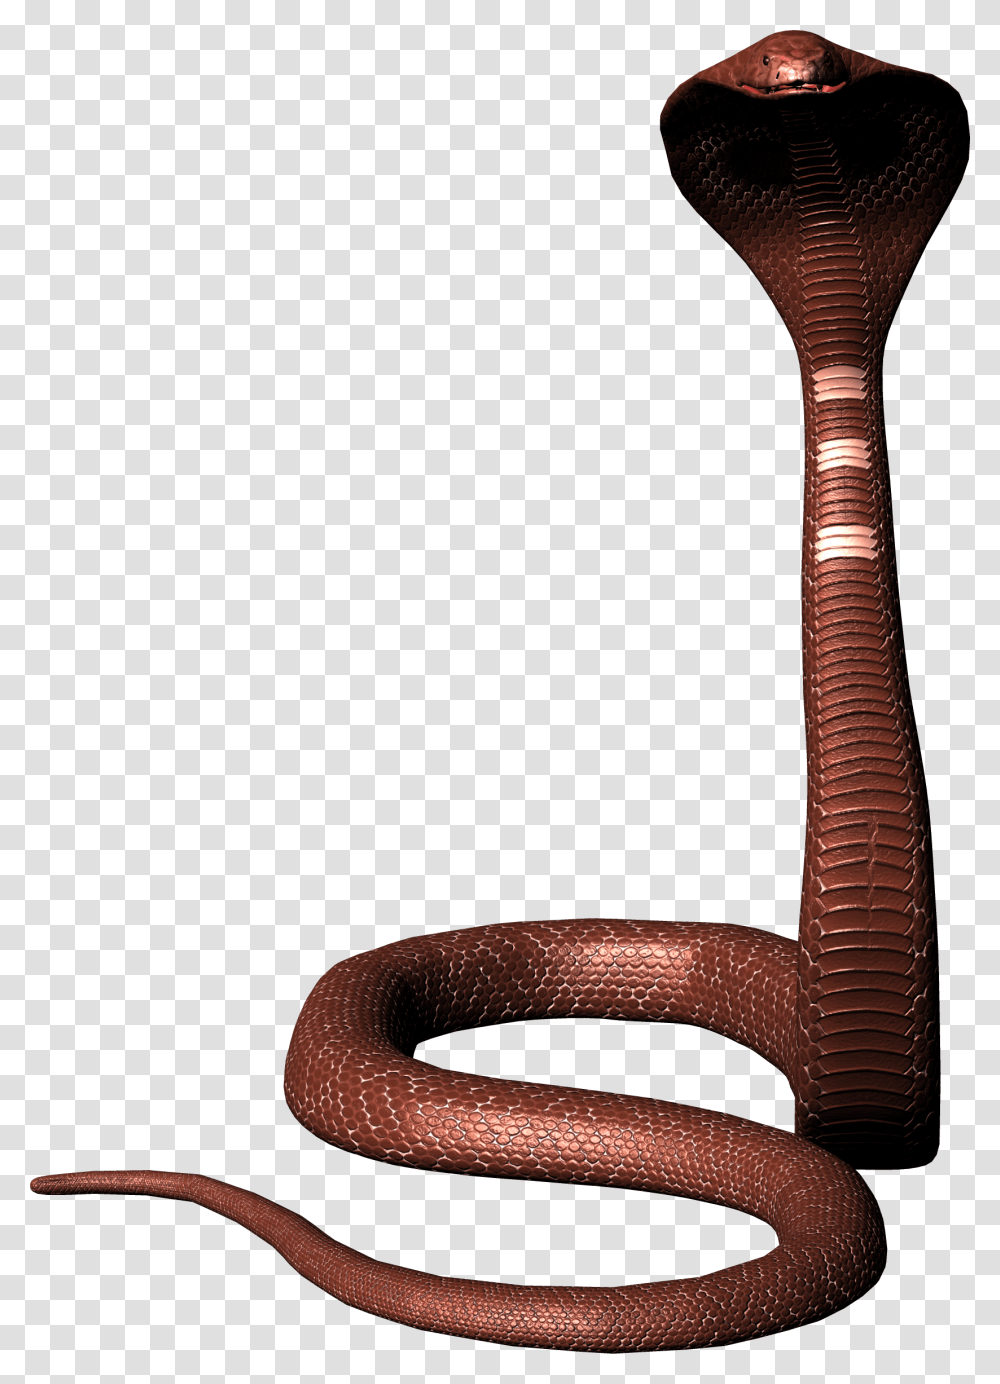 Snake Image Free Download Picture Snakes, Hammer, Tool, Bronze, Brick Transparent Png